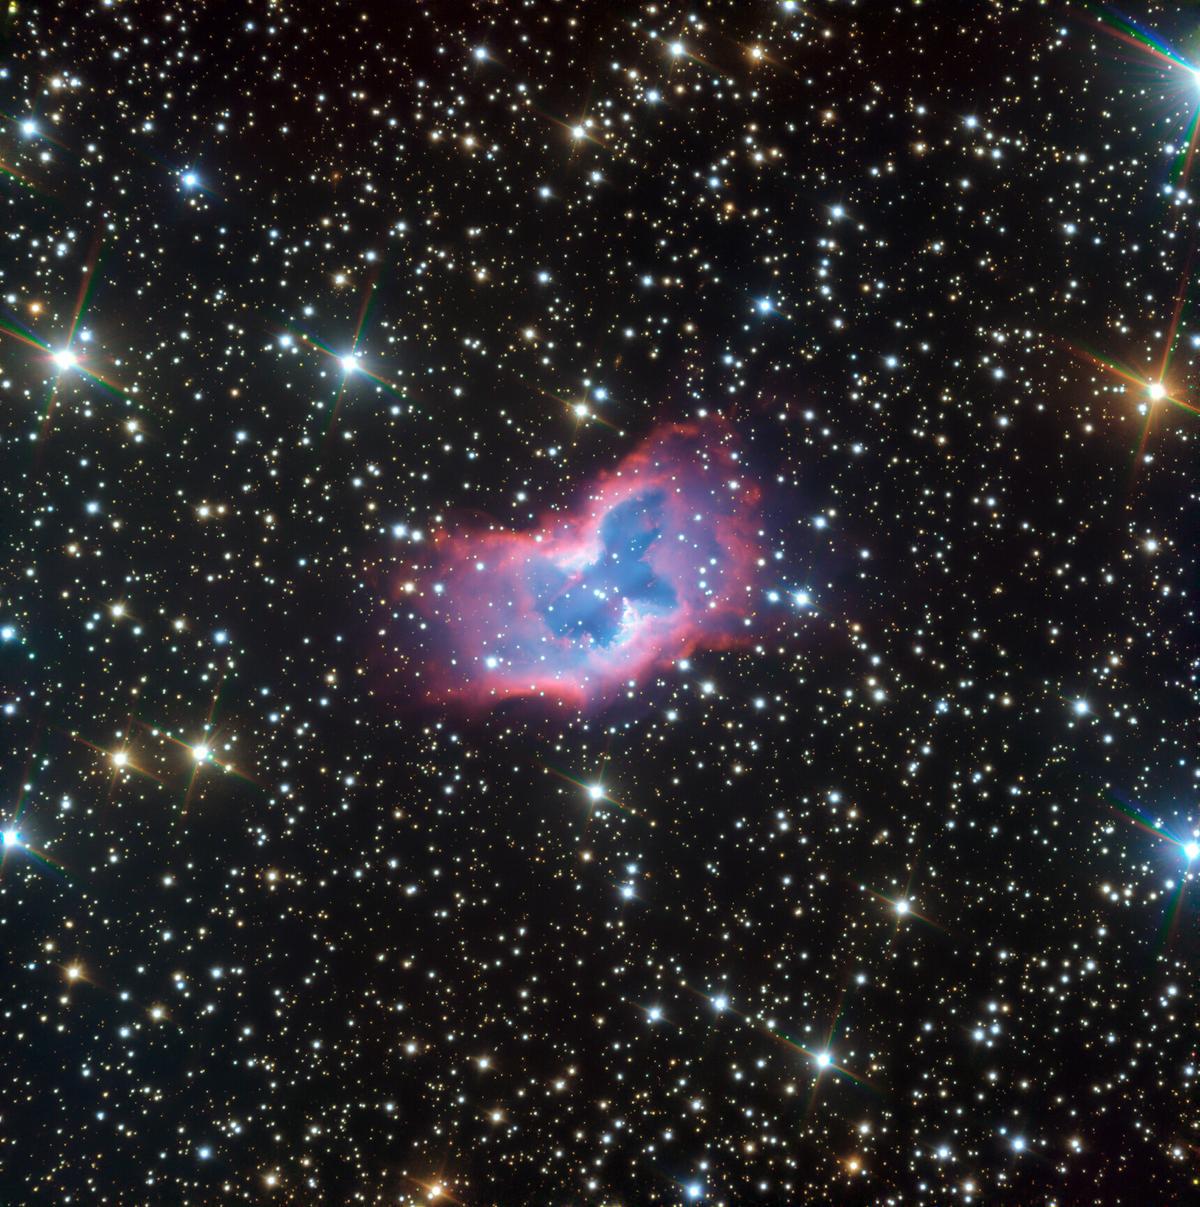 This image of the planetary nebula NGC 2899 is the most detailed look at the "space butterfly" yet, captured by the European Space Observatory's Very Large Telescope. (Courtesy of <a href="https://www.eso.org/public/images/eso2012a/">ESO</a>)